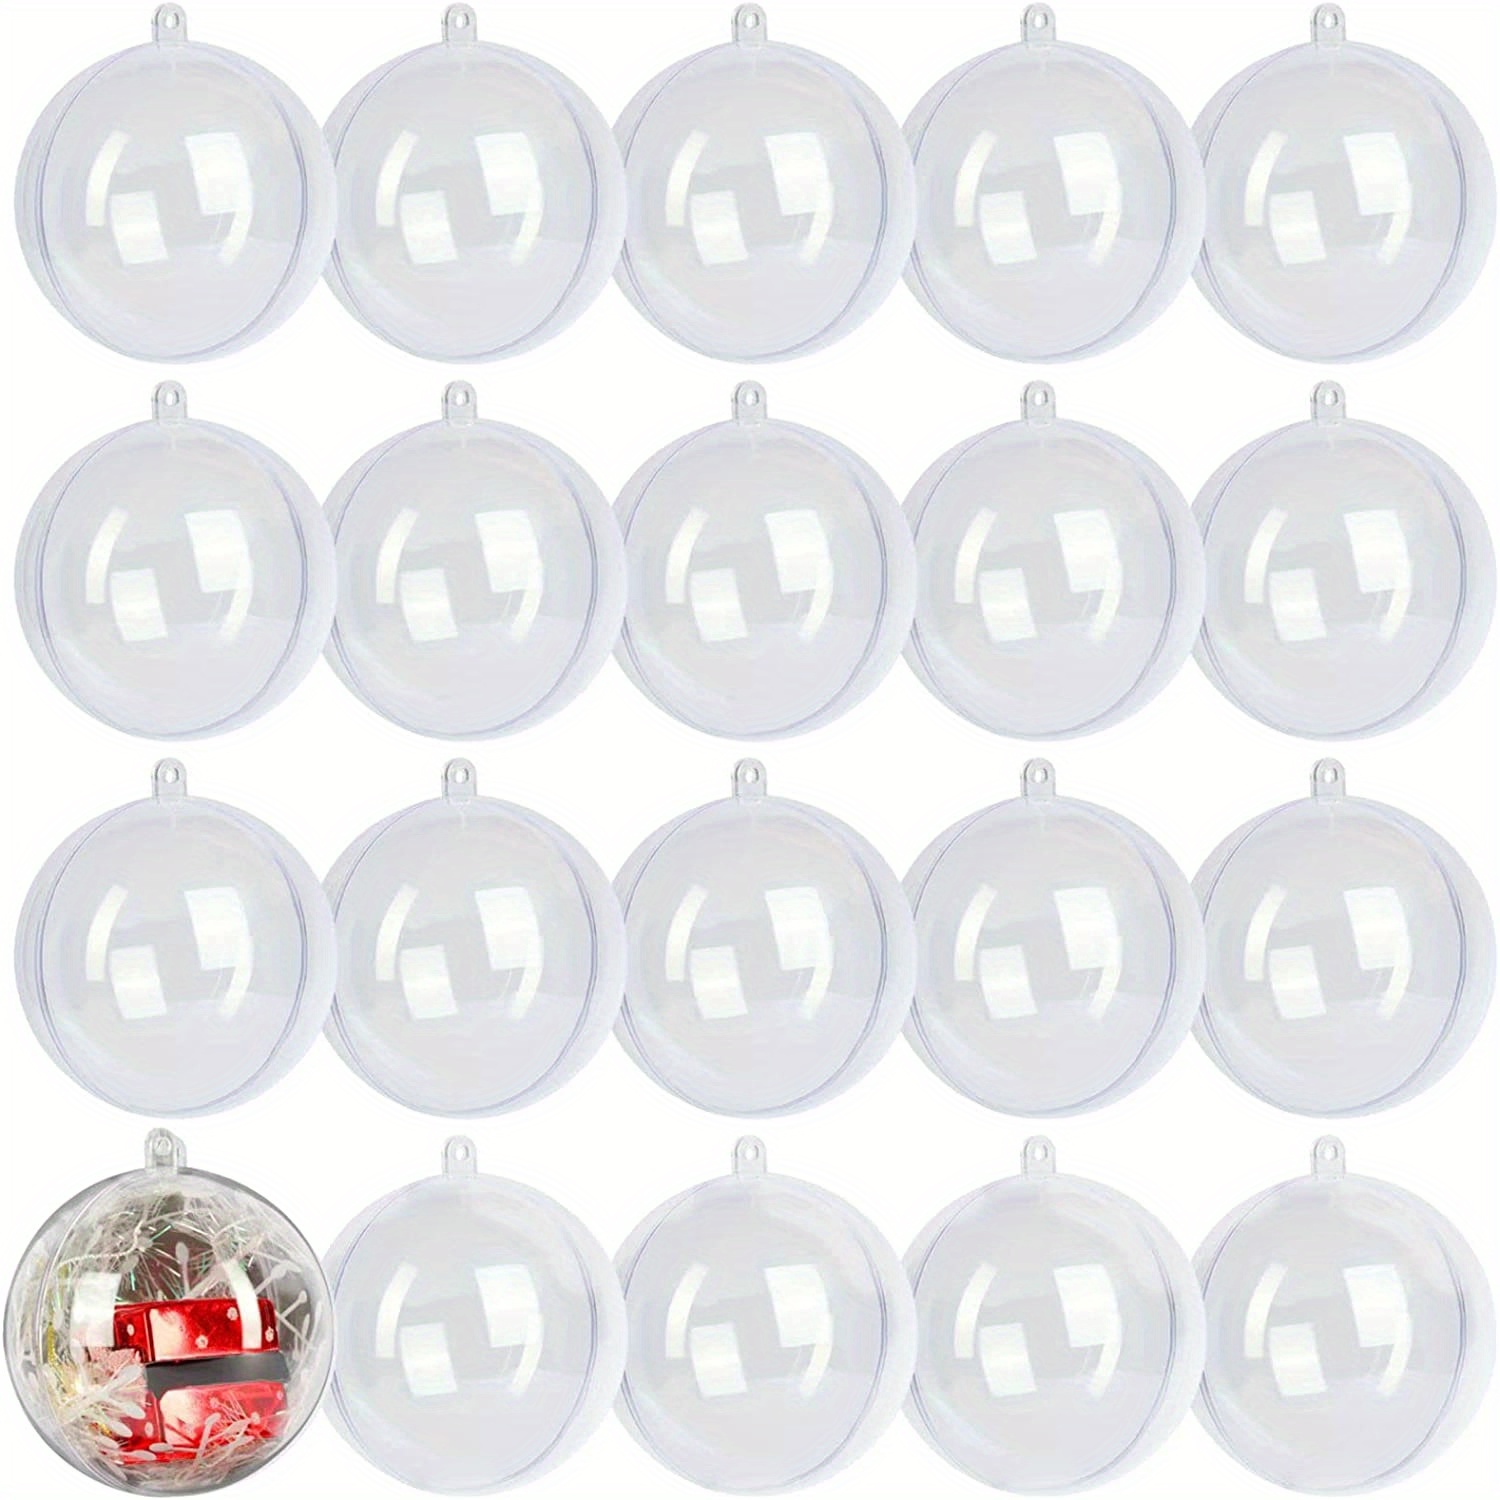  24 Pcs Clear Plastic Fillable Ornament Balls,70mm DIY Fillable  Christmas Ornaments Balls for Christmas,Holiday, Wedding,Party,Home Decor :  Home & Kitchen